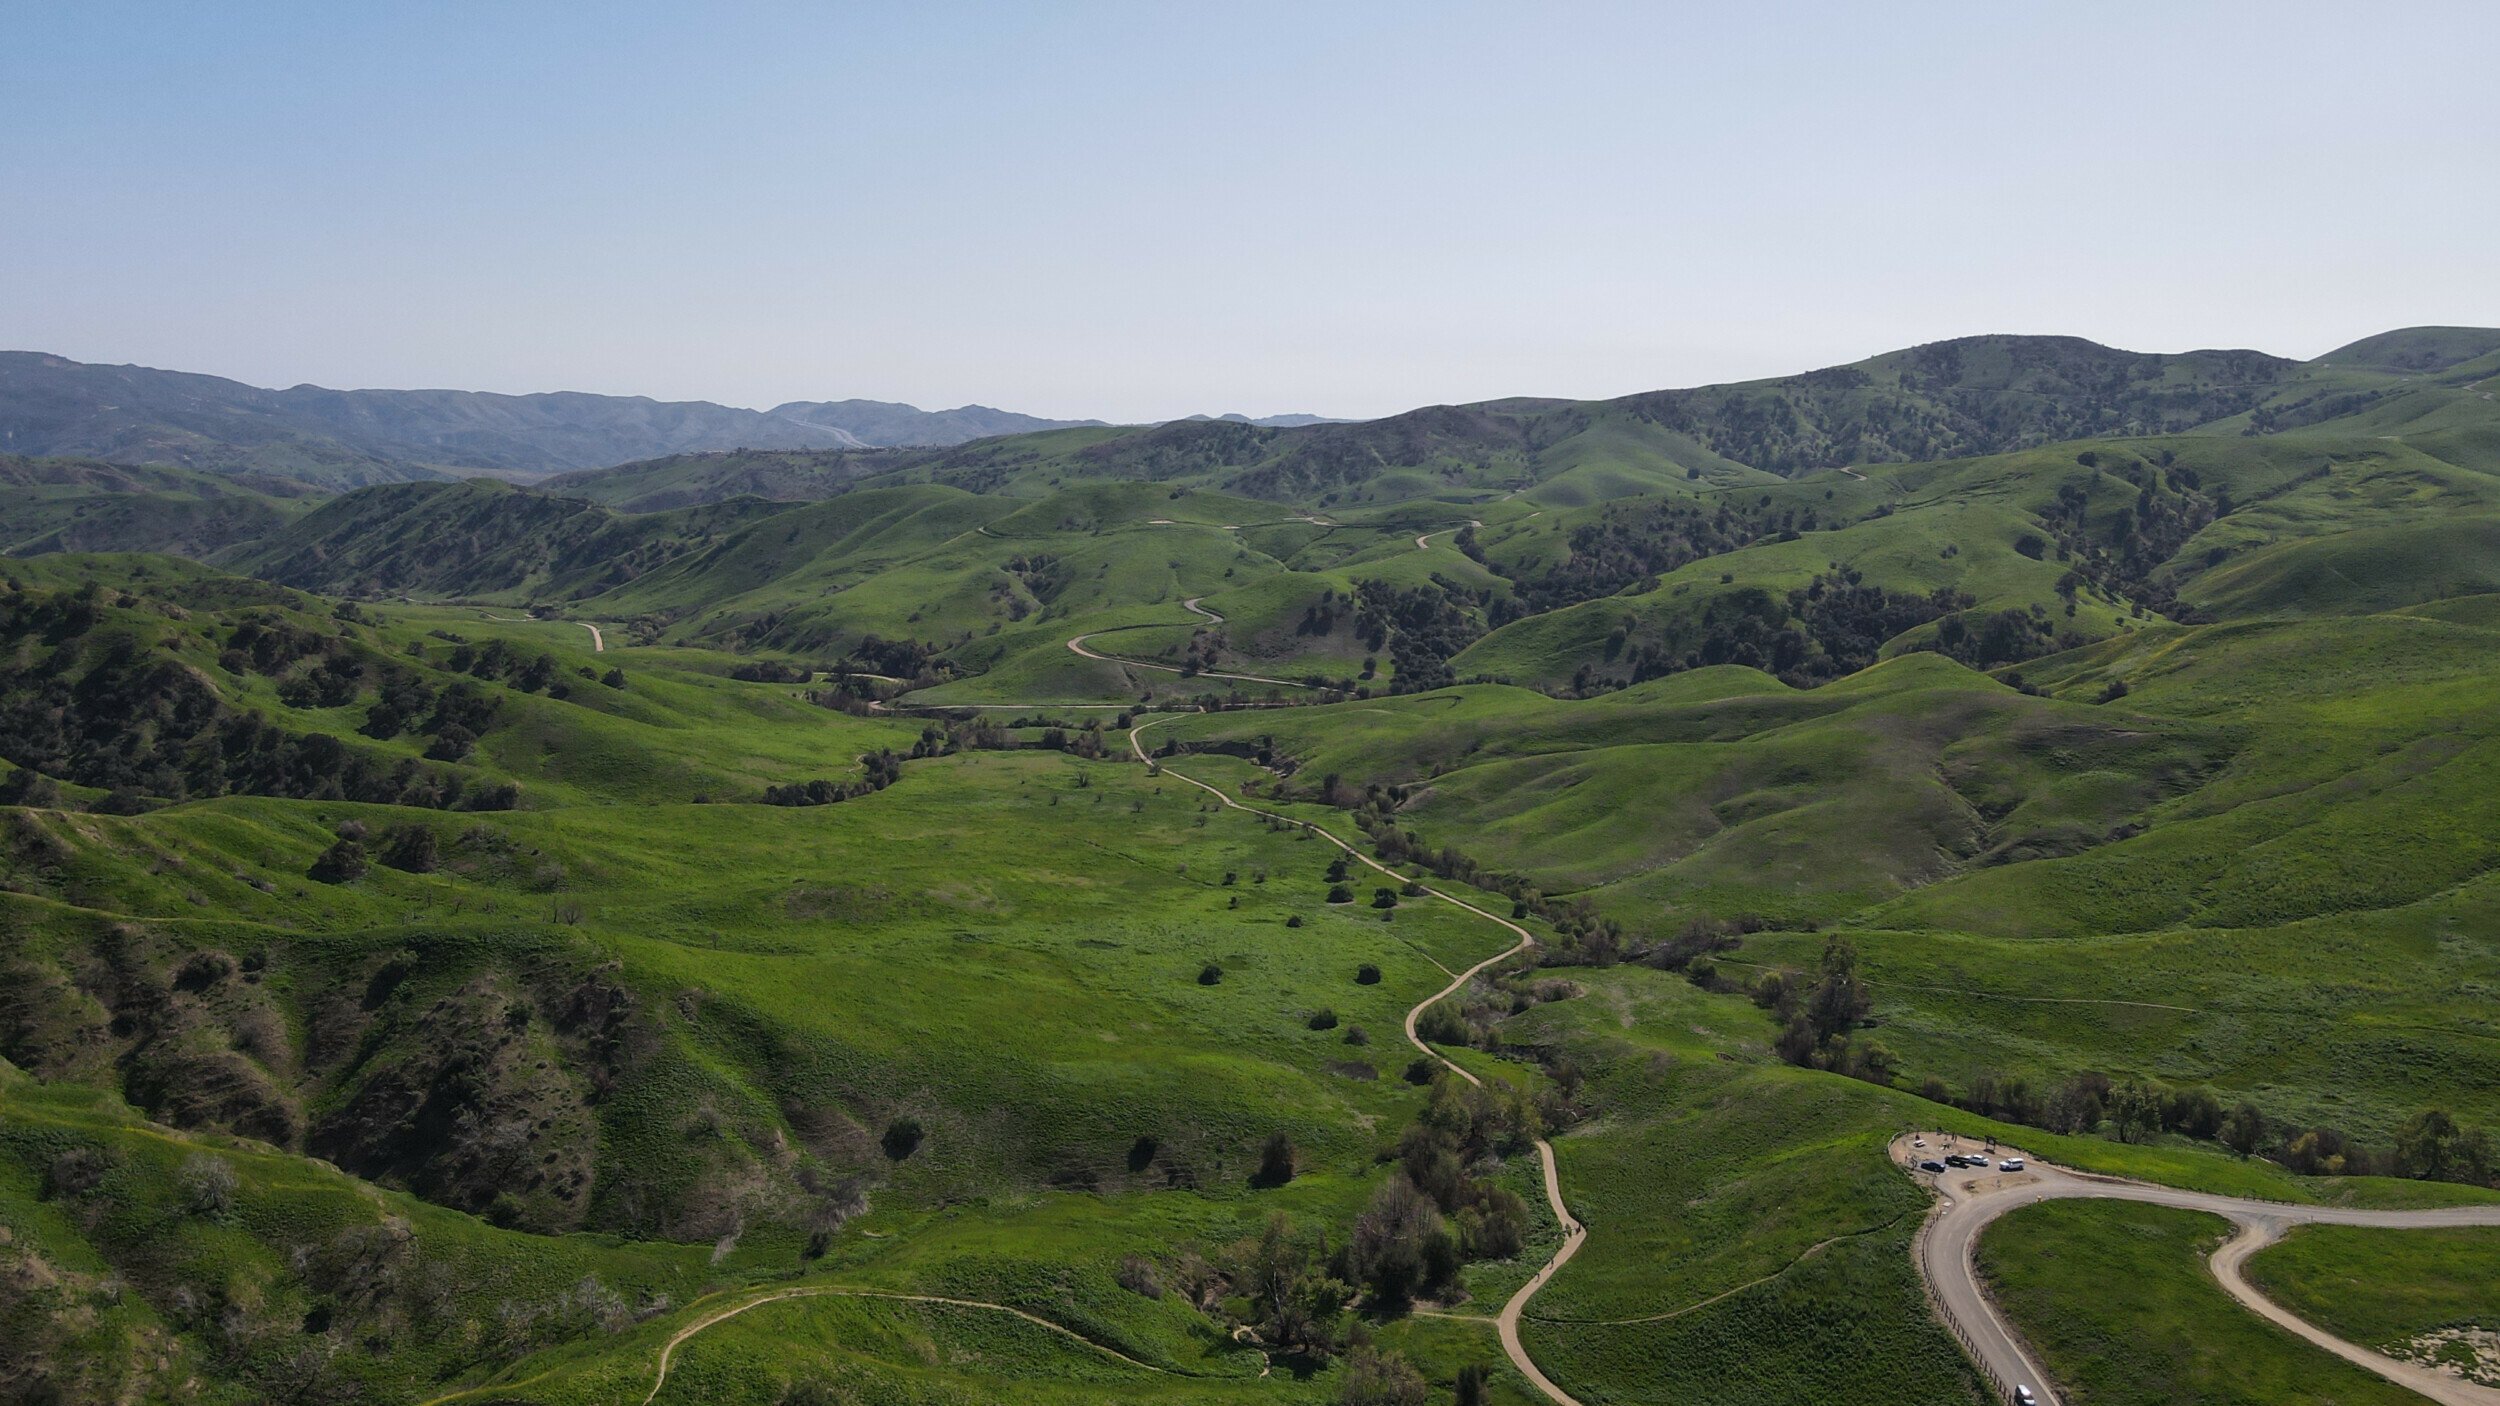 Aerial view of Chino Hills State Park showcasing lush green hills and a winding road taken by DJI Mavic Air 2 drone.